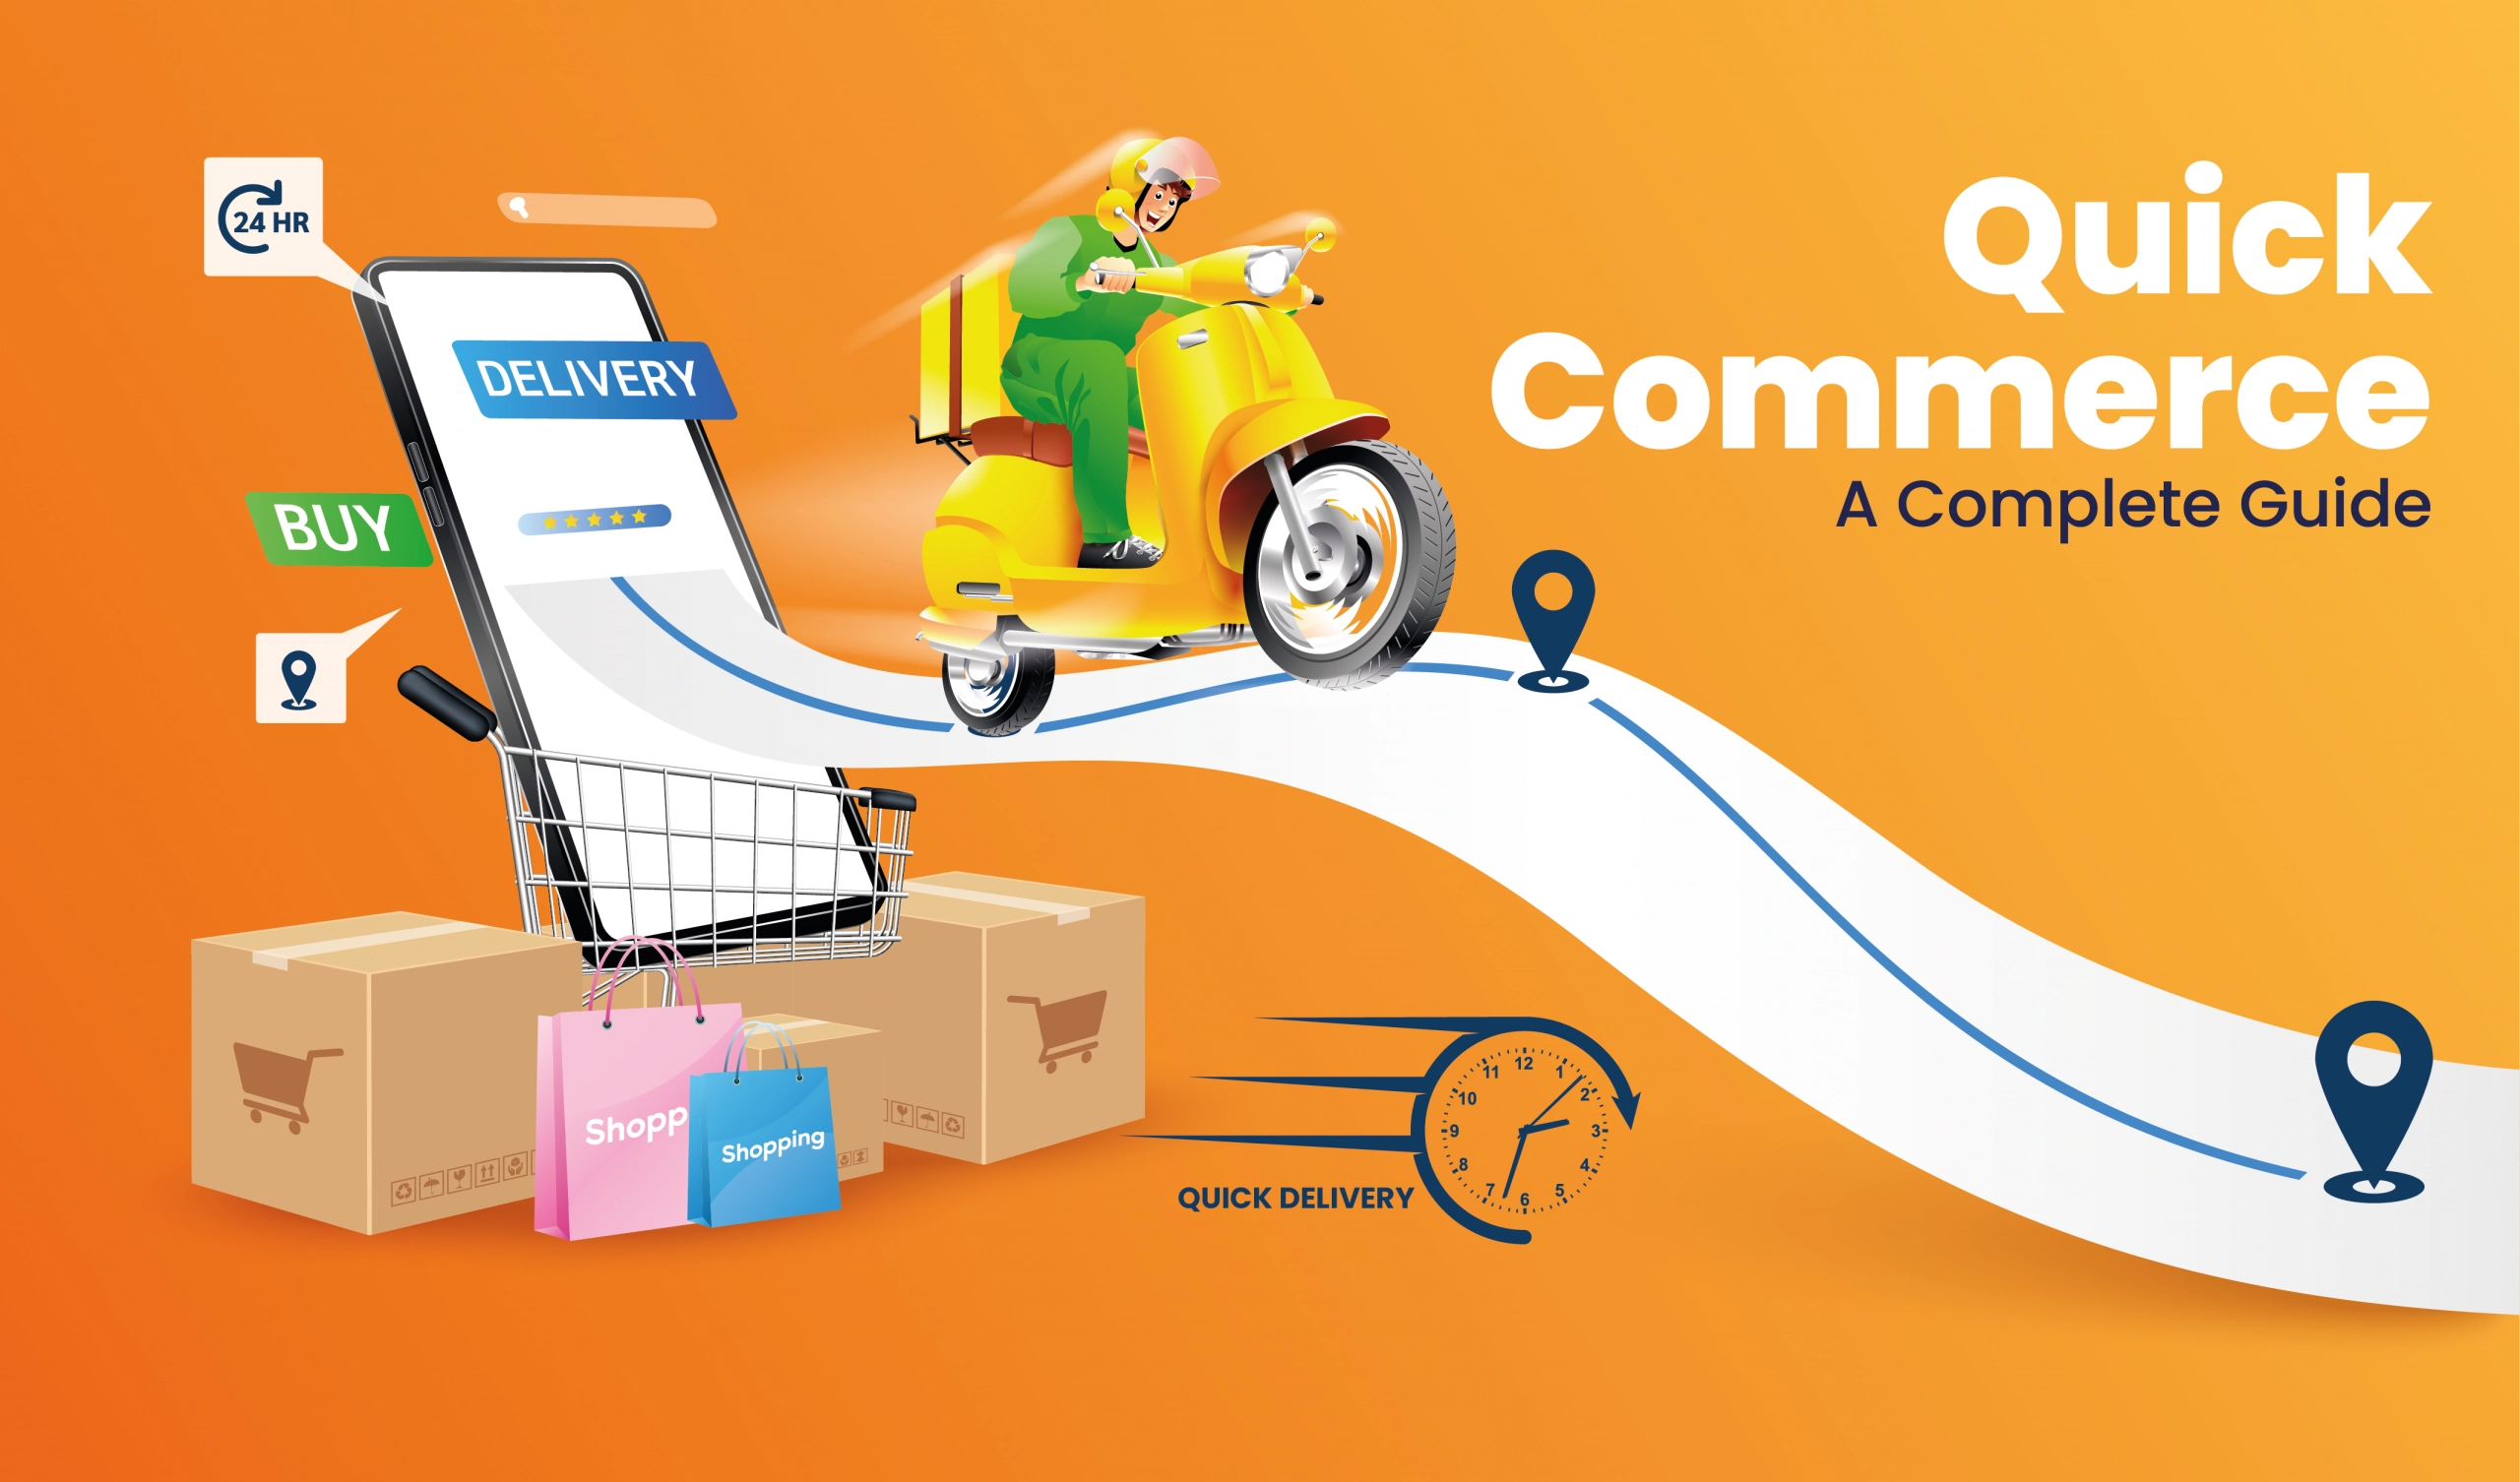 Quick commerce: pioneering the next generation of delivery